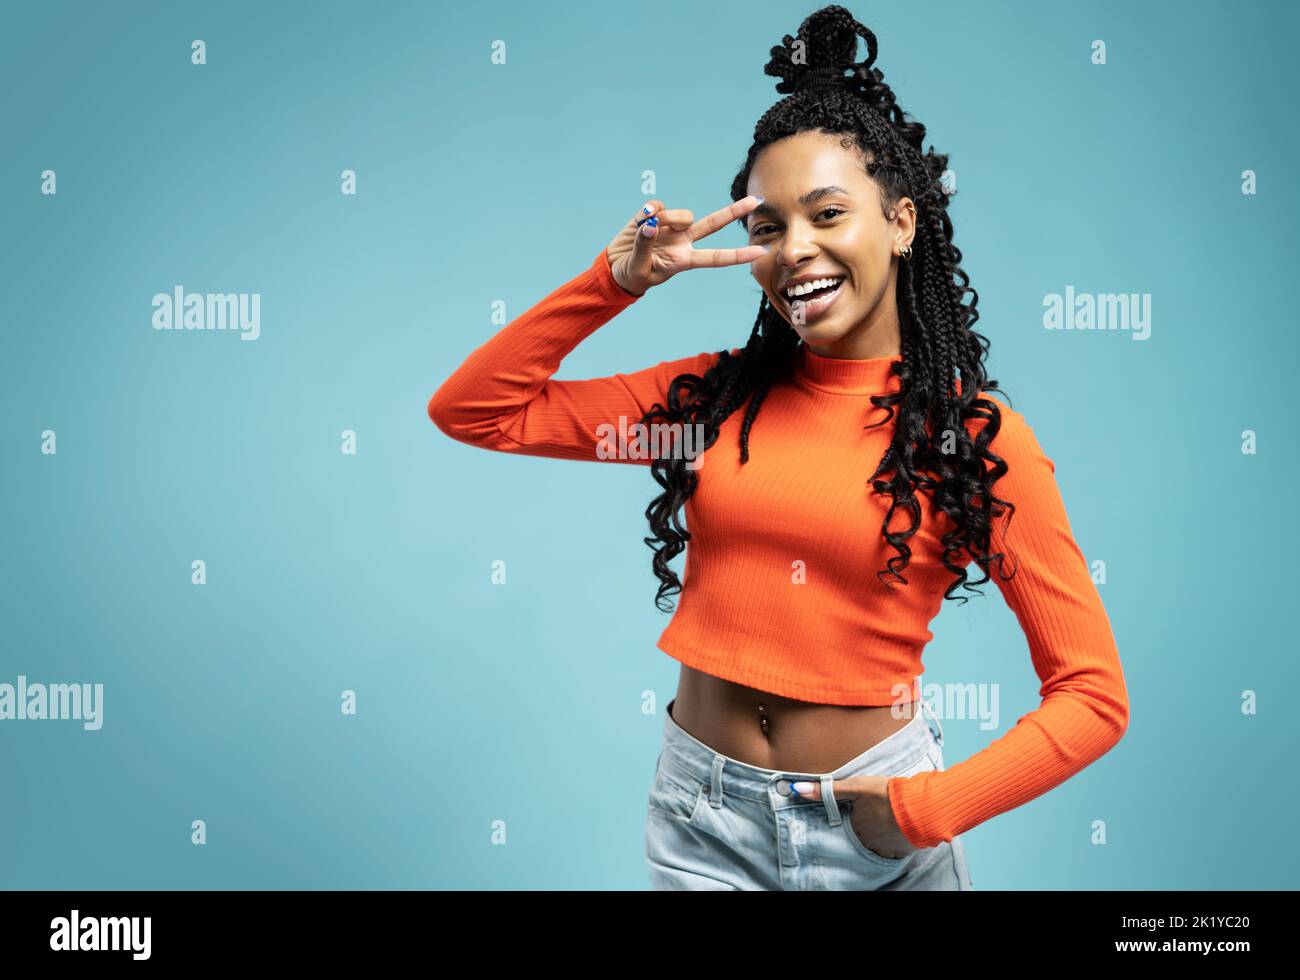 Young smiling friendly positive fun cool cheerful woman 20s showing victory sign isolated on blue backround studio portrait. People lifestyle concept Stock Photo